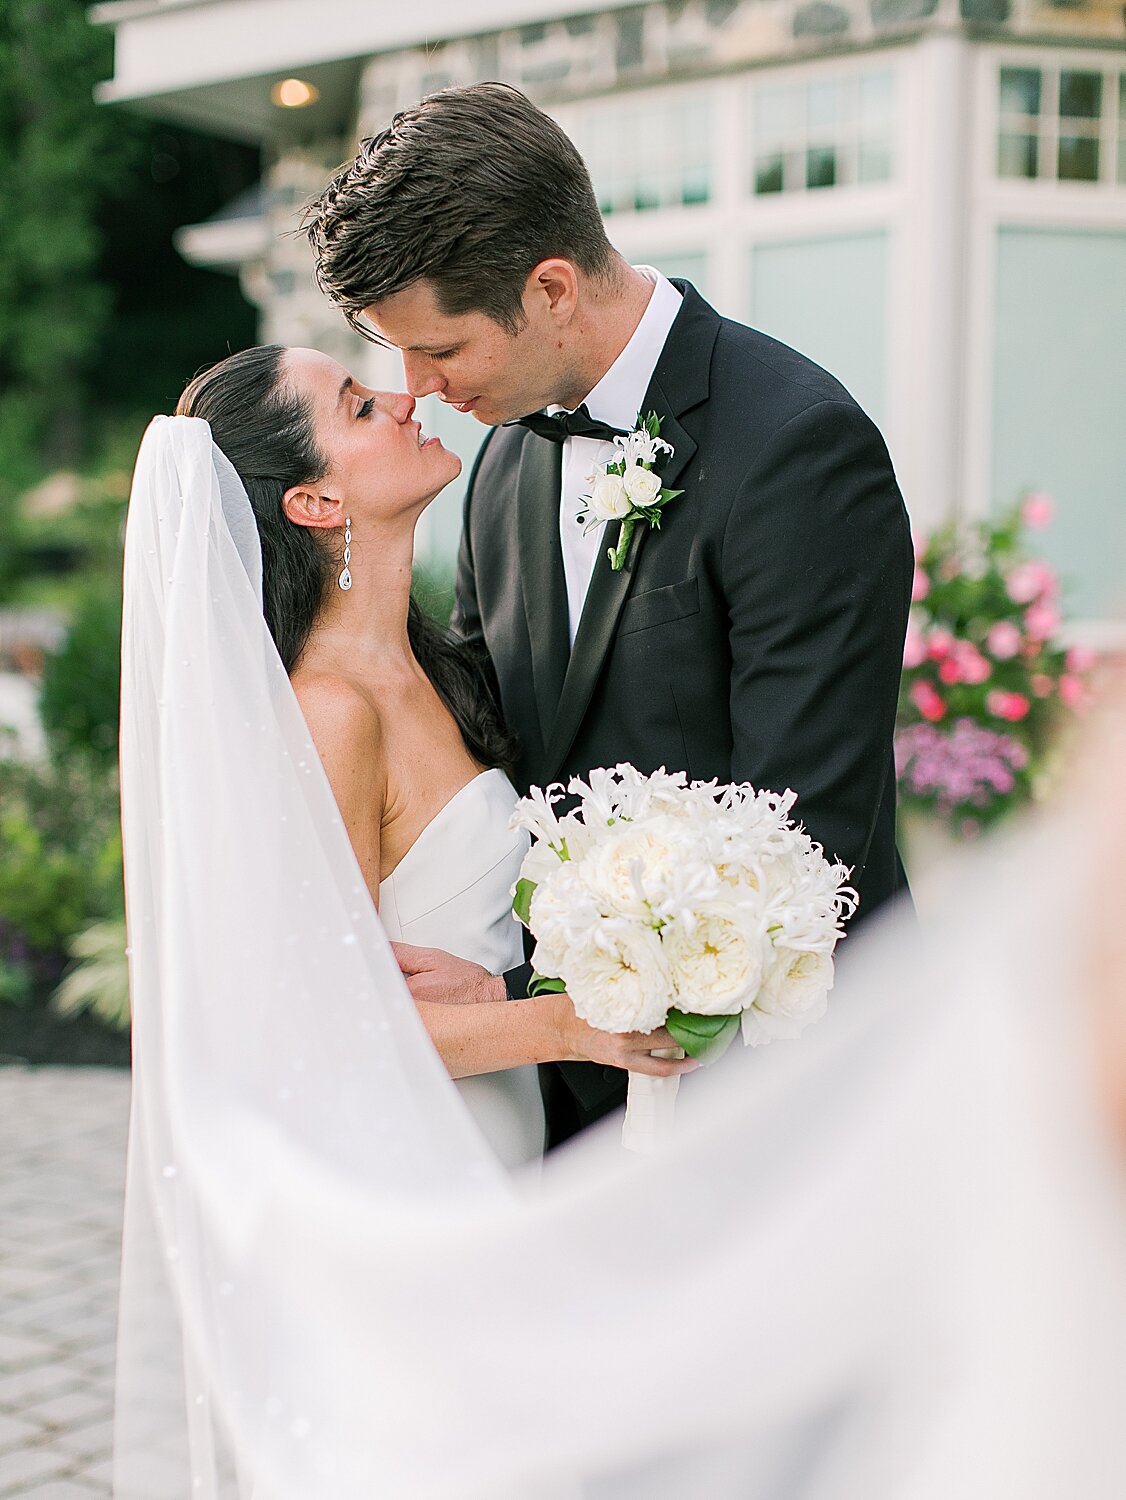 newlyweds kiss after wedding ceremony | Stylish Private Home Wedding Inspiration | Asher Gardner Photography